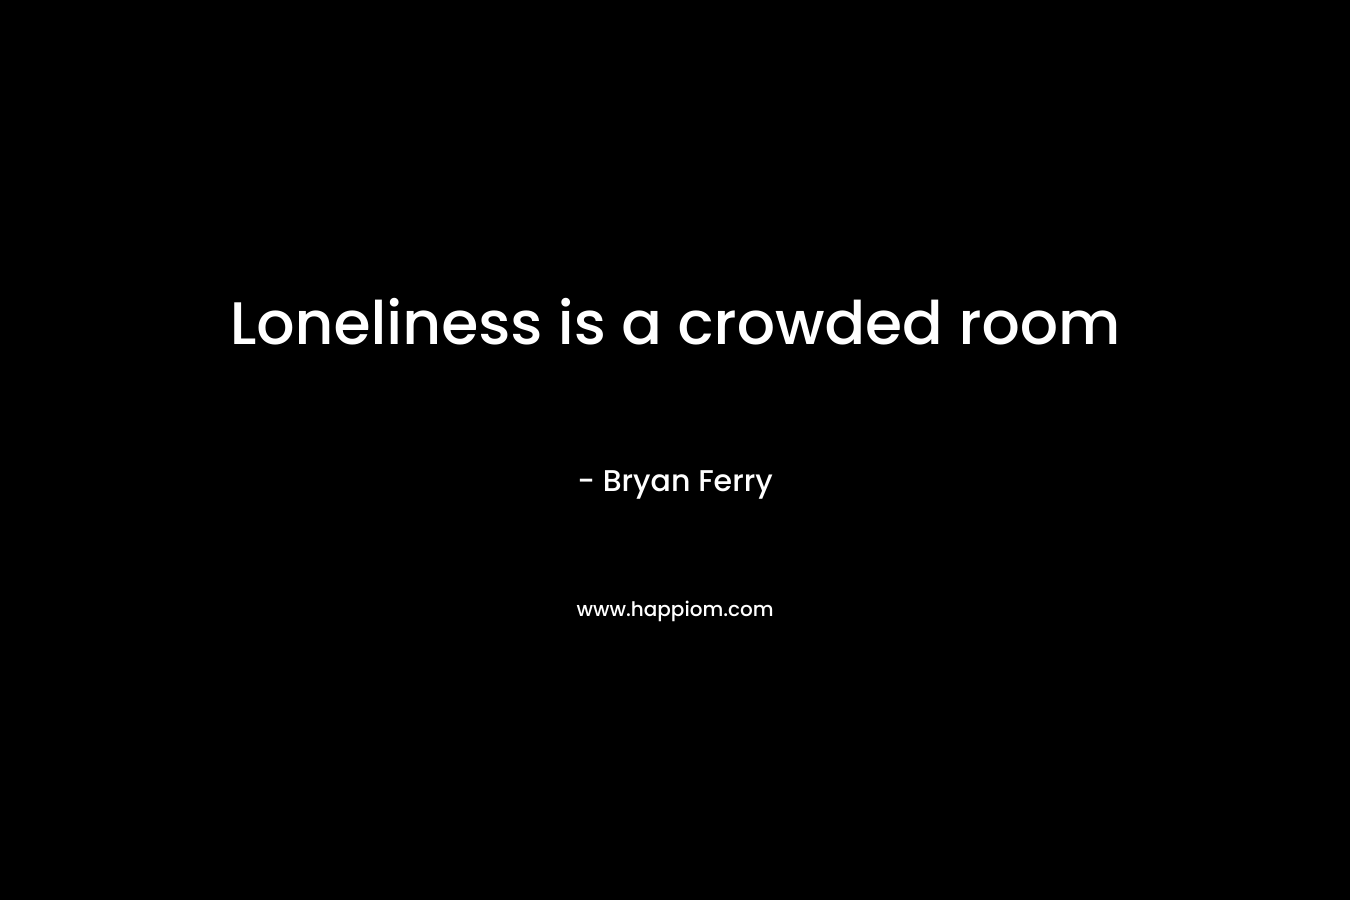 Loneliness is a crowded room